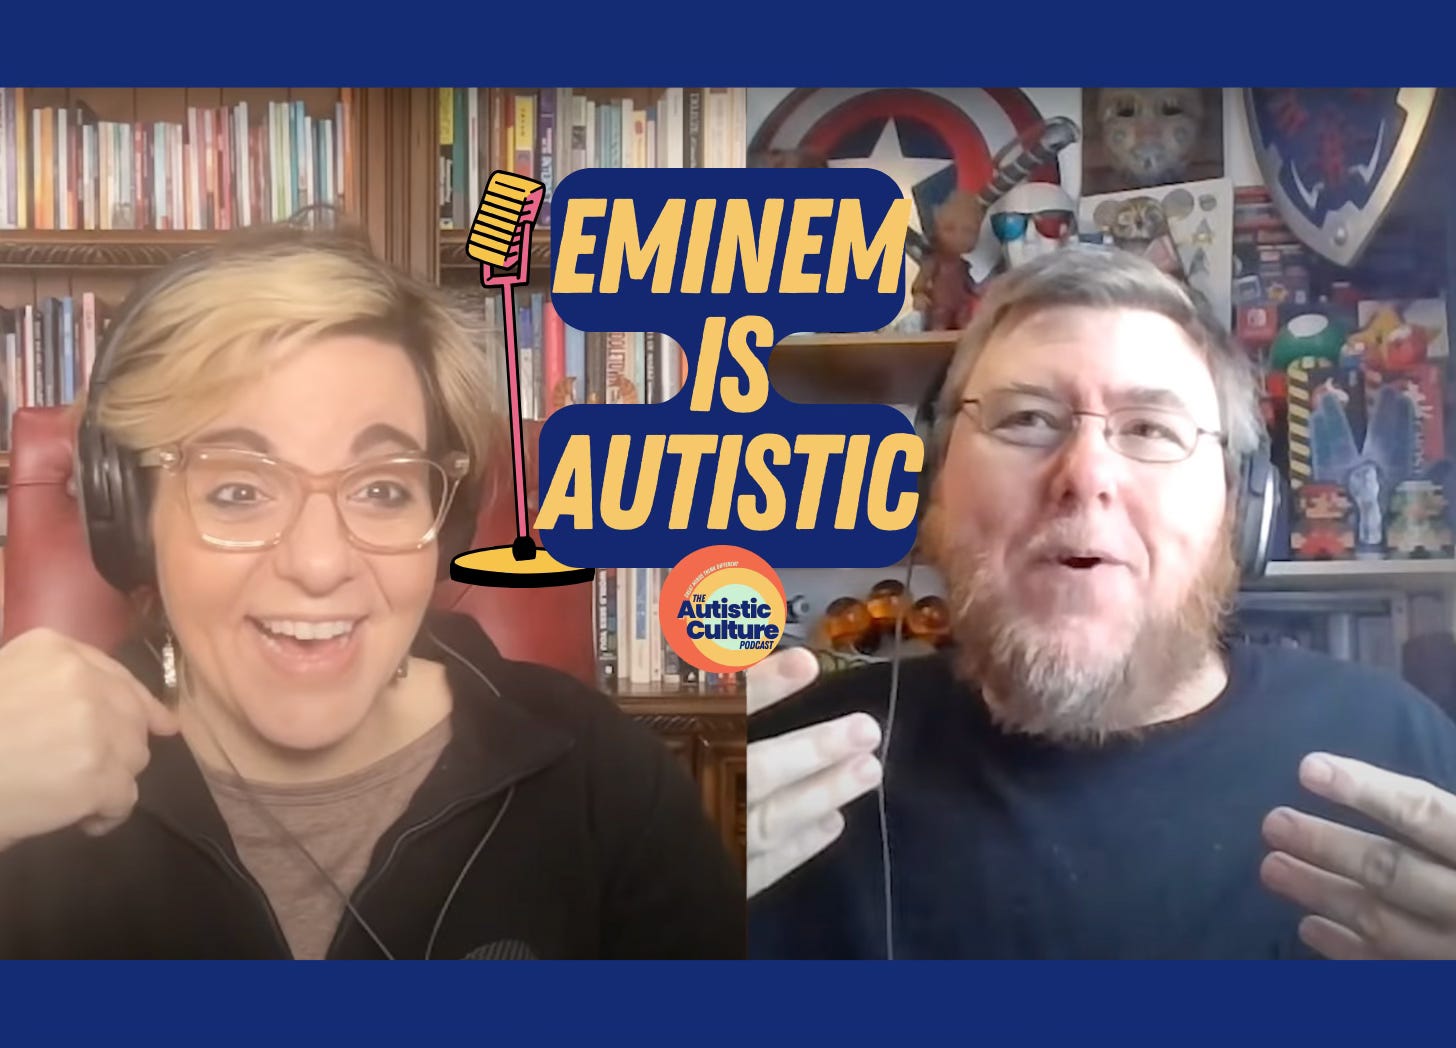 Listen to autistic podcast hosts discuss: Eminem is autistic. Autism Podcast | Eminem asperger syndrome | Eminem is one of the most famous Autistic celebrities and Autistic musicians.  He displayed classic autism symptoms in teens, and his sensory seeking nature and intense interest in music led to a dynamite career. 